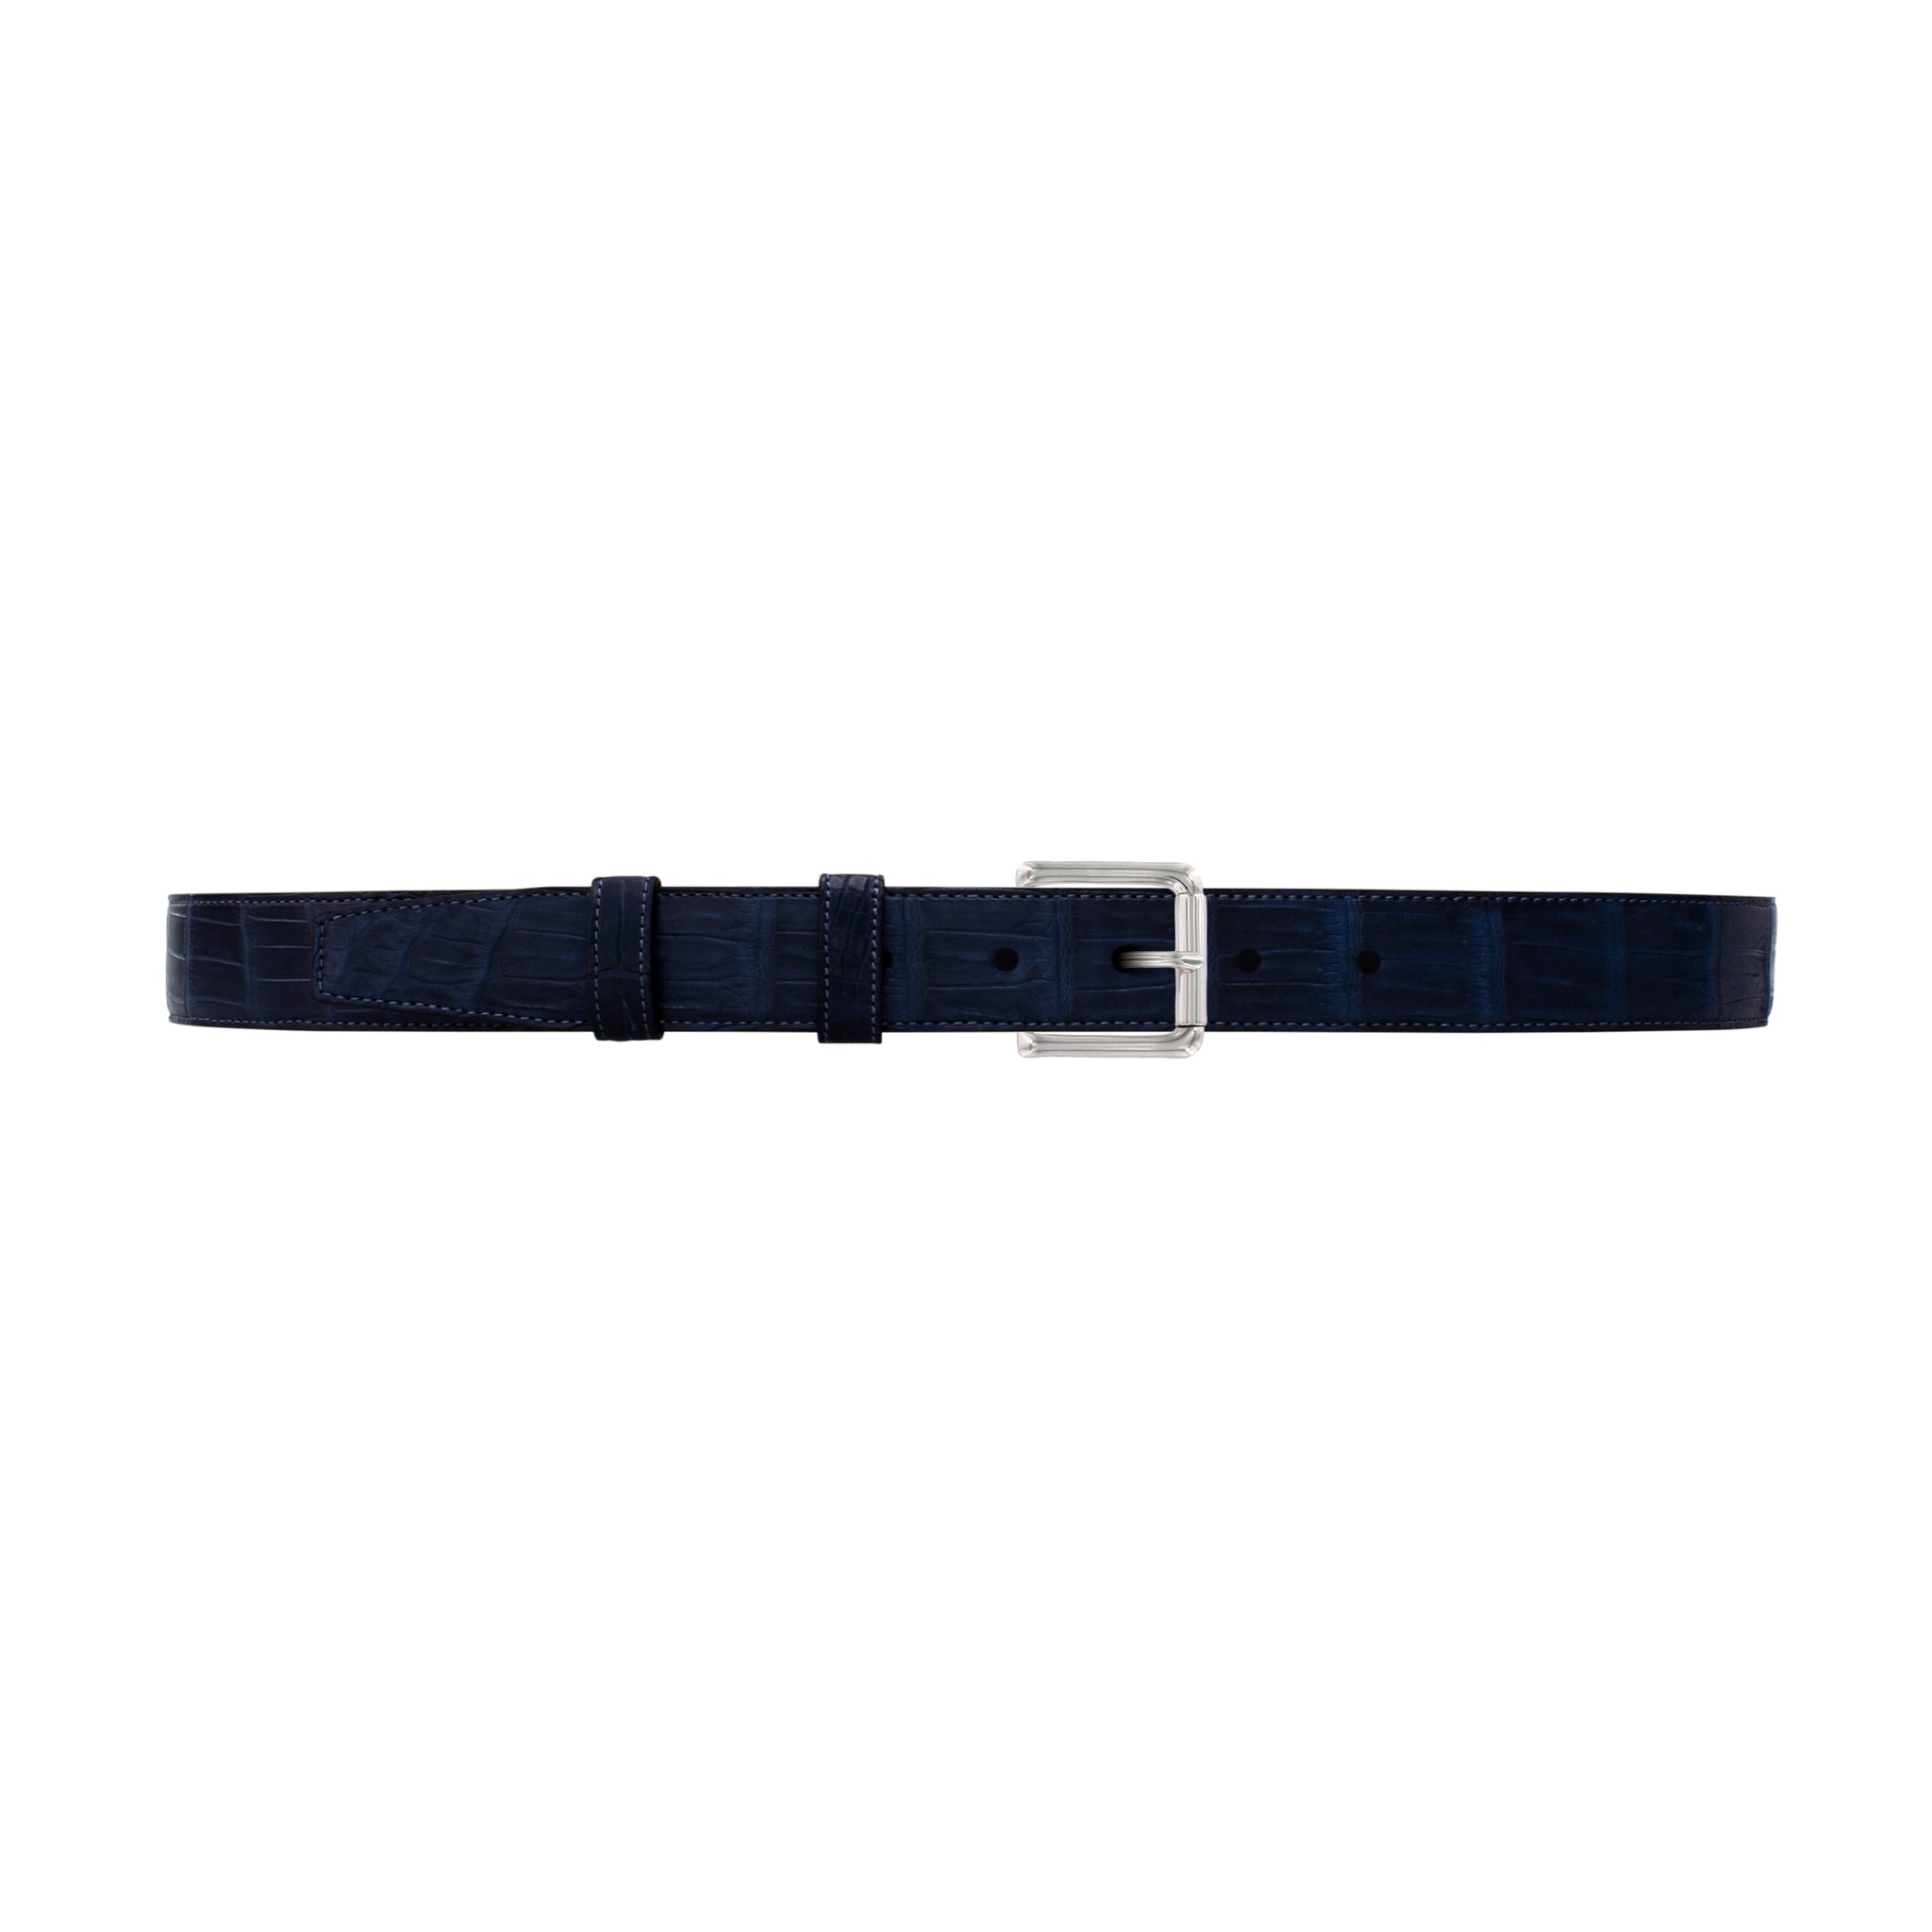 1" Midnight Classic Belt with Denver Casual Buckle in Polished Nickel